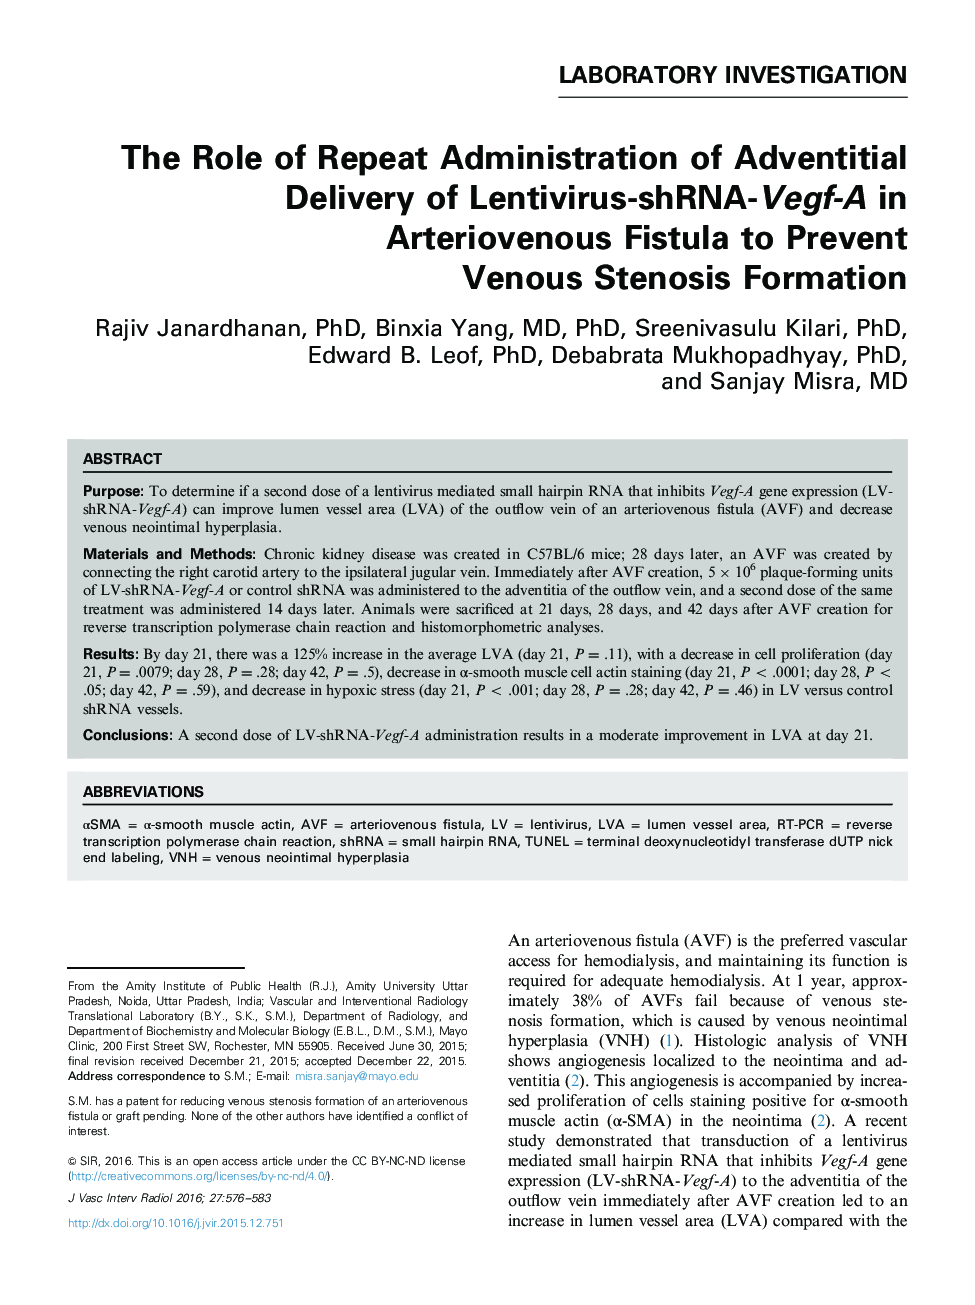 The Role of Repeat Administration of Adventitial Delivery of Lentivirus-shRNA-Vegf-A in Arteriovenous Fistula to Prevent Venous Stenosis Formation